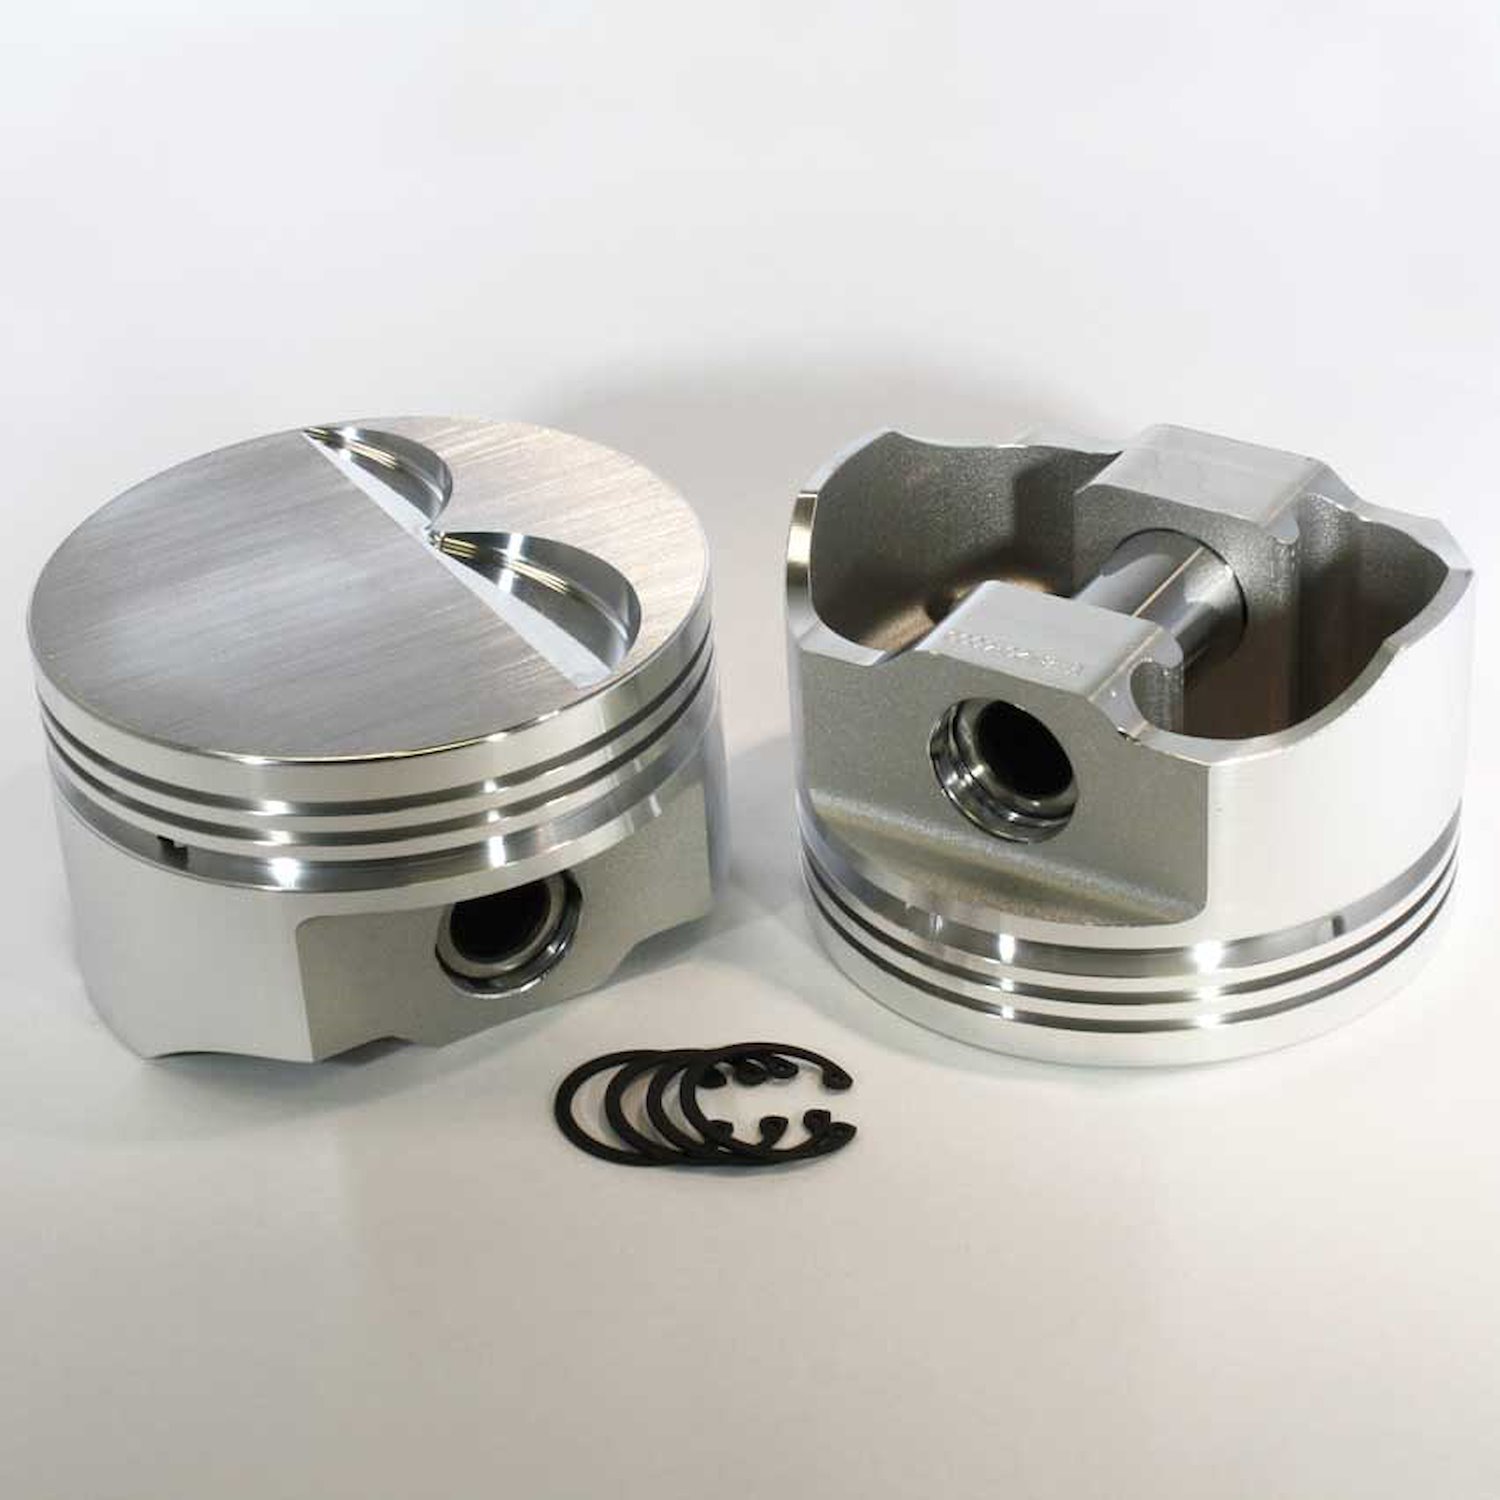 8785-4030 E-Series Flat Top Piston Set for 1999-2019 Chevy LS, 4.030 in. Bore, -3cc Volume [OEM Stroke]